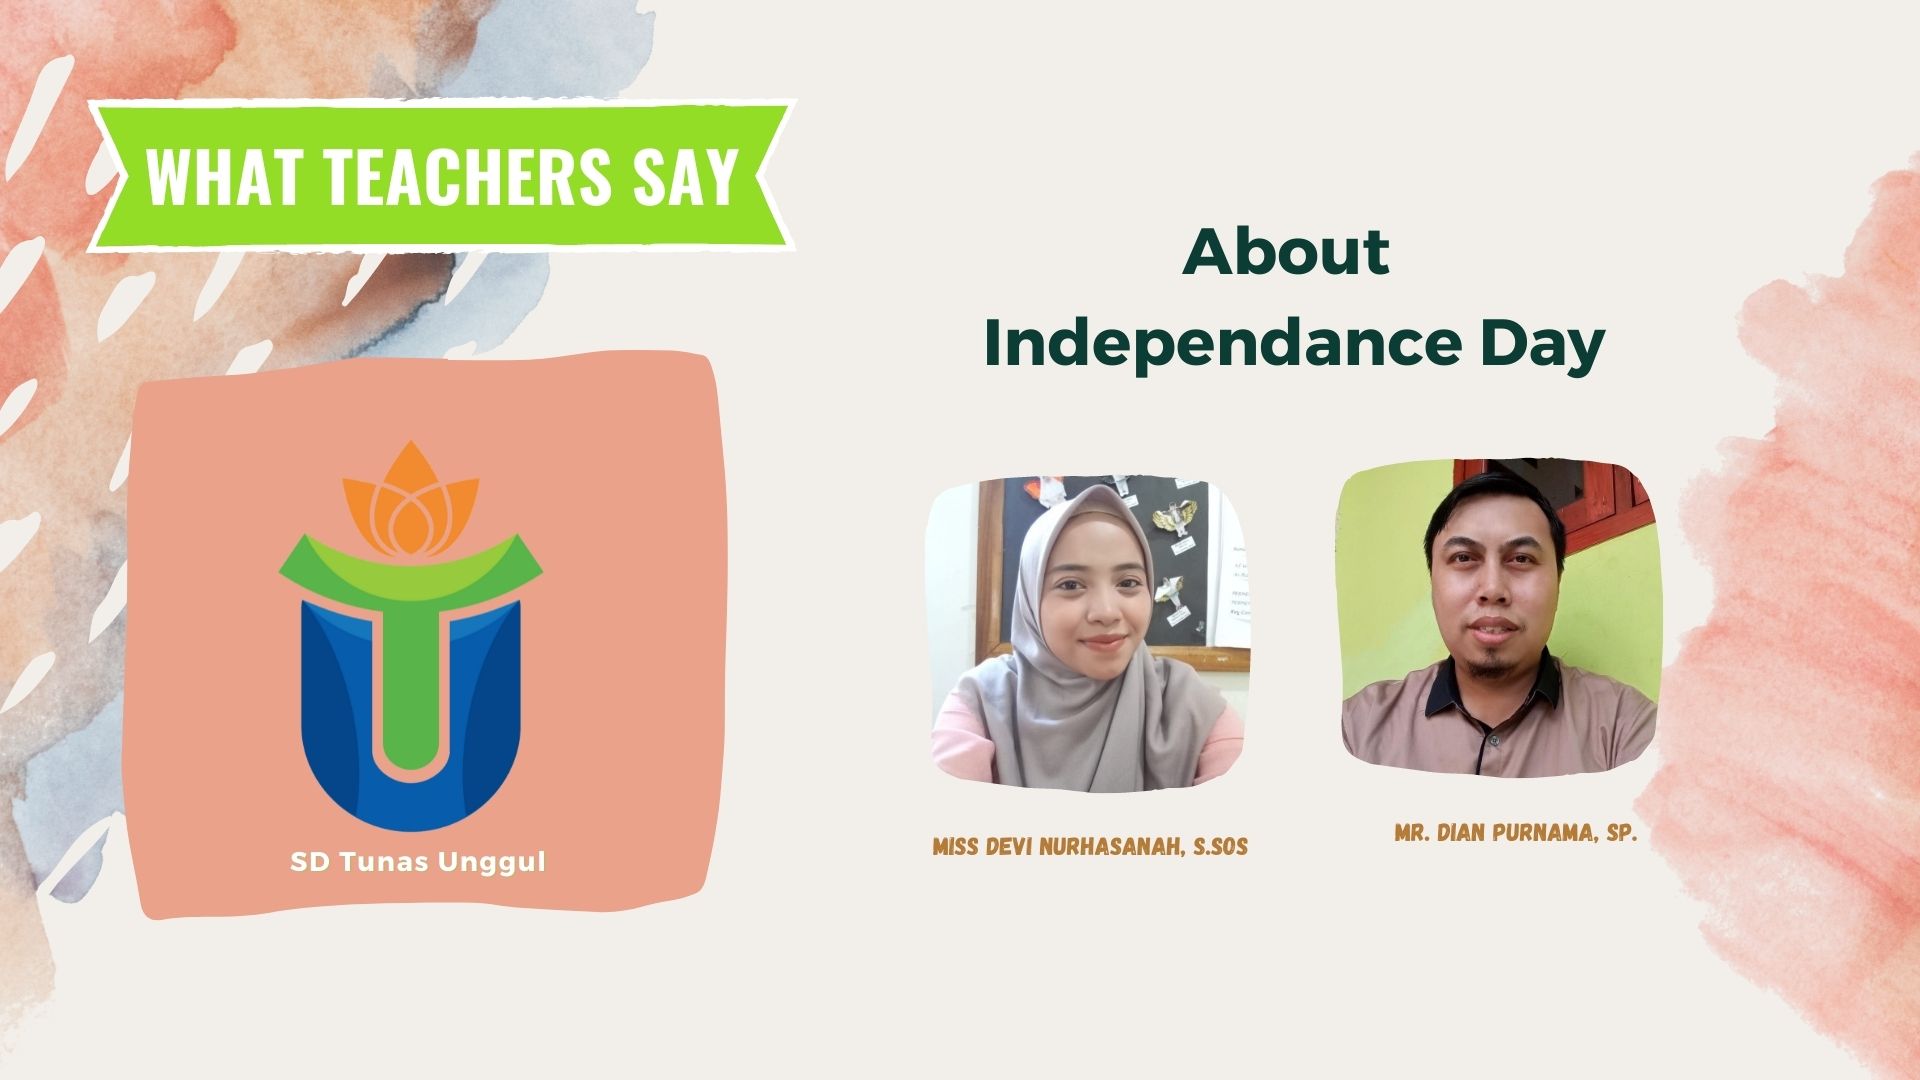 WHAT TEACHERS SAY About Independence Day